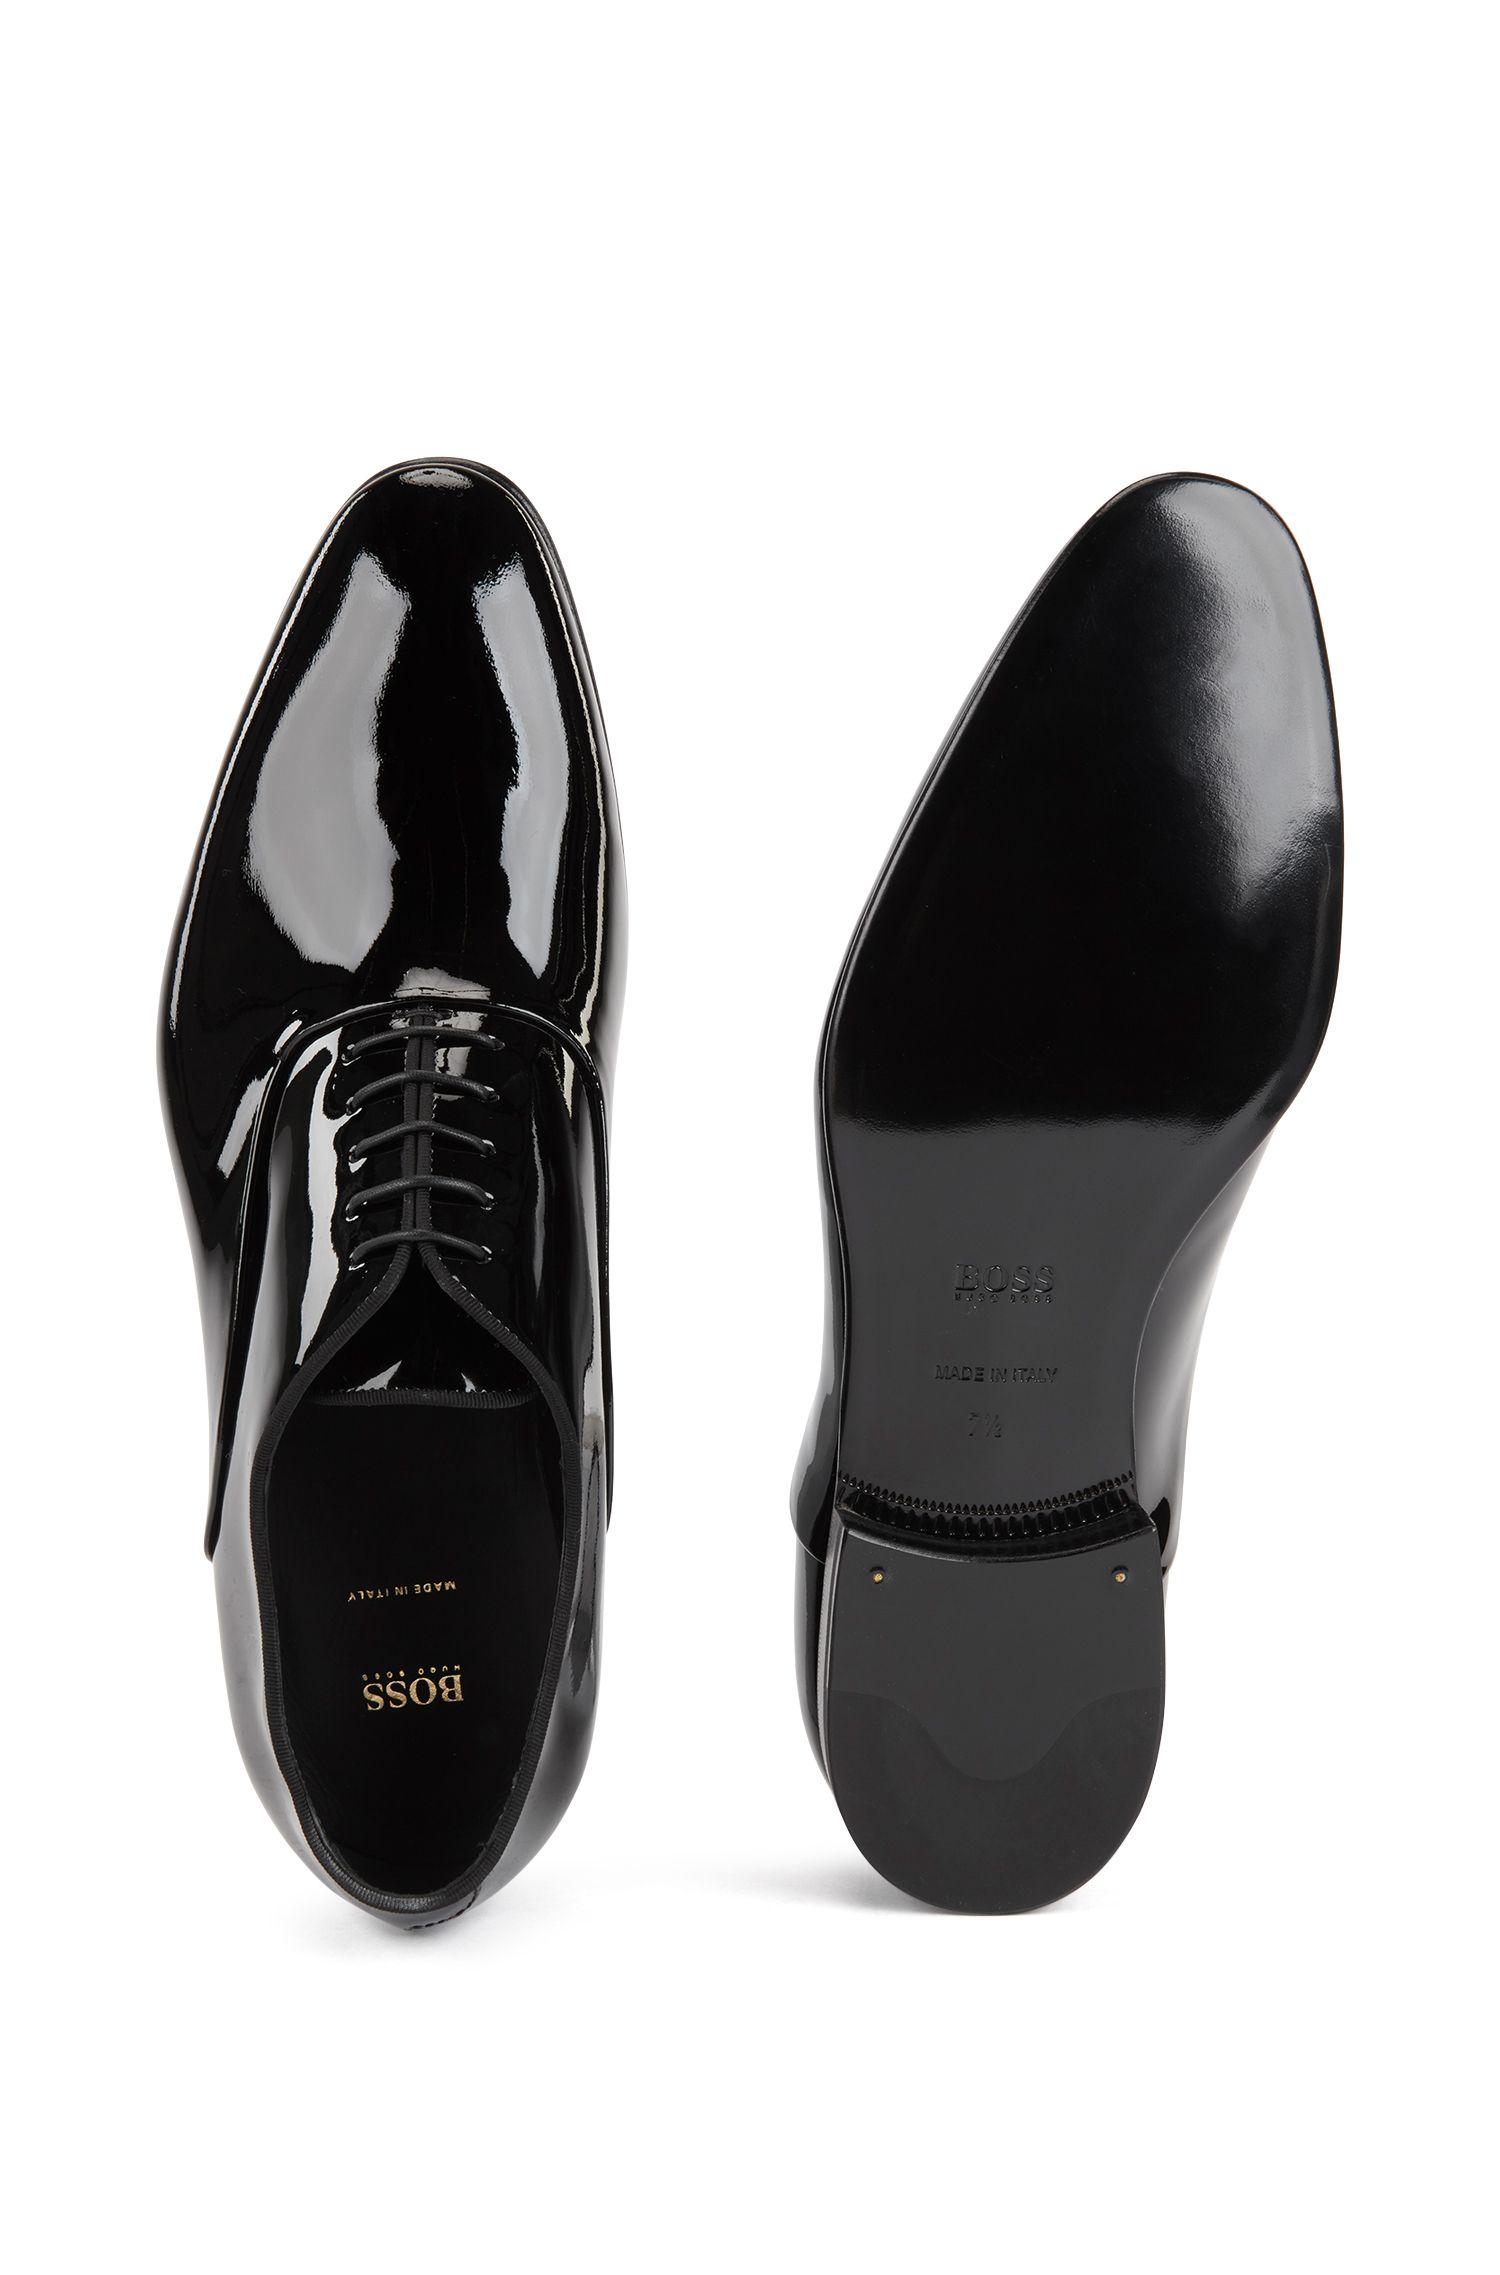 BOSS by Hugo Boss Patent Leather Oxford Shoes With Grosgrain Collar ...